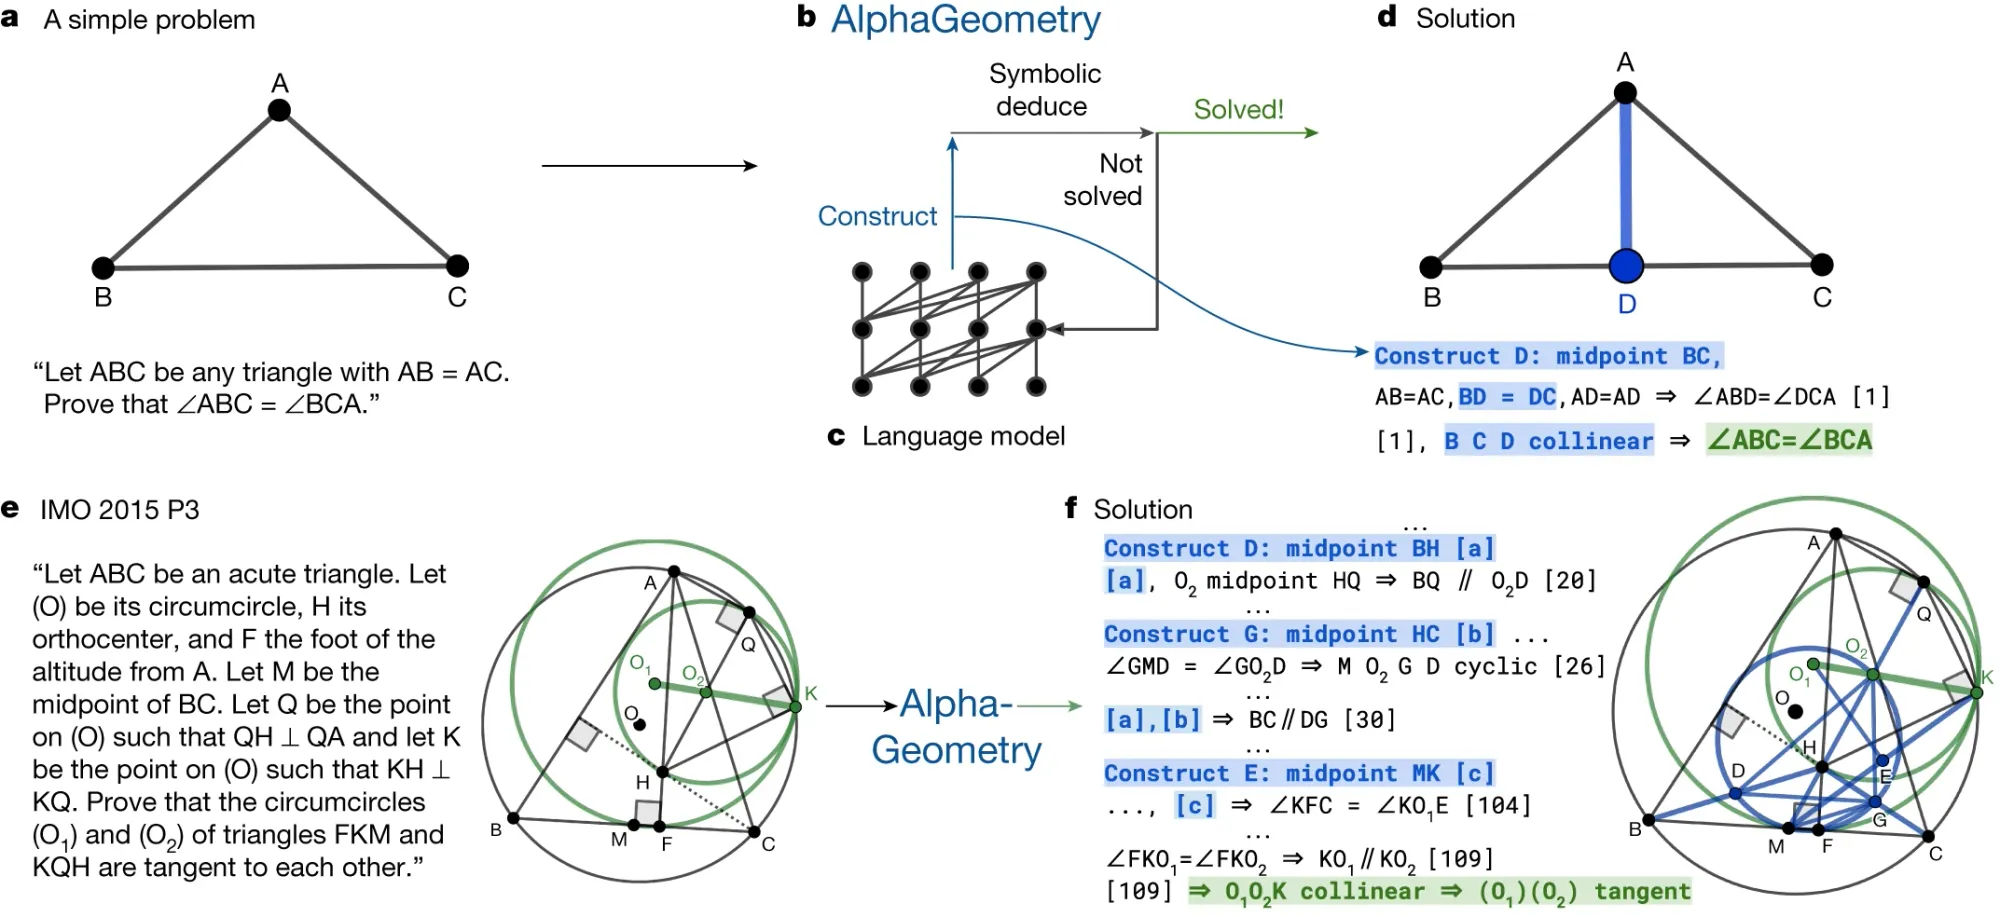 Overview of the neuro-symbolic AlphaGeometry